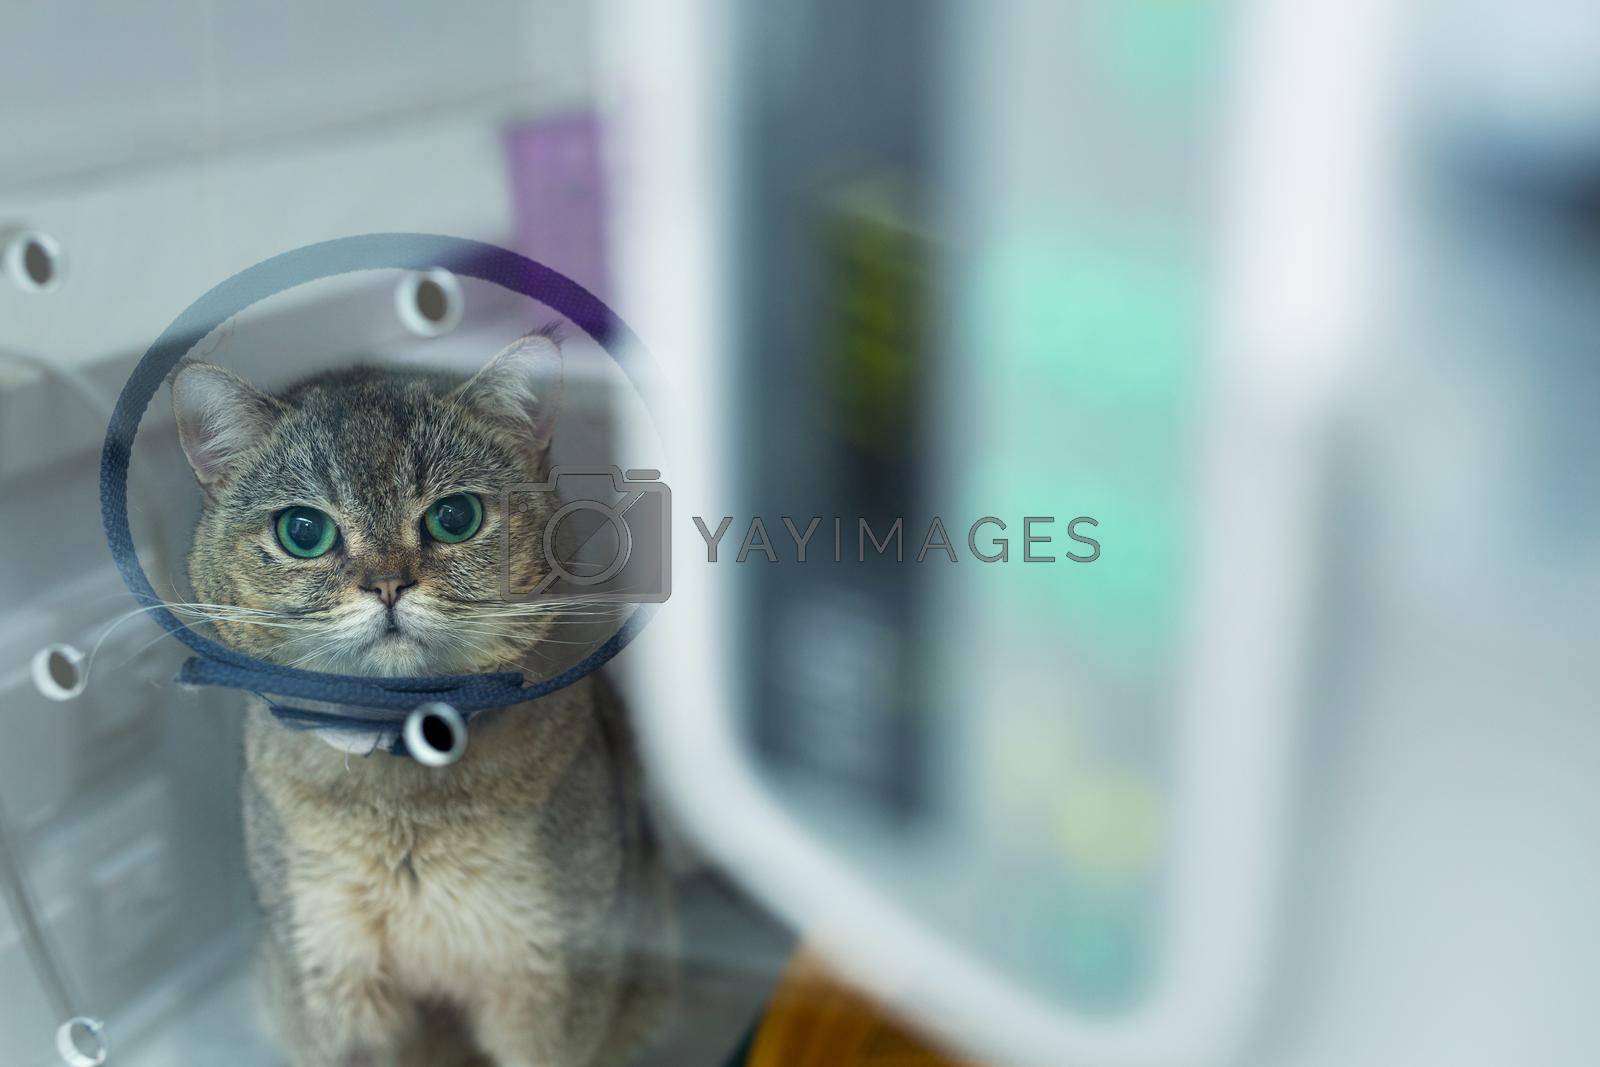 Royalty free image of Domestic heterochromia cat wear cone pet recovery collar after surgery, anti bite lick wound healing safety. by StudioPeace